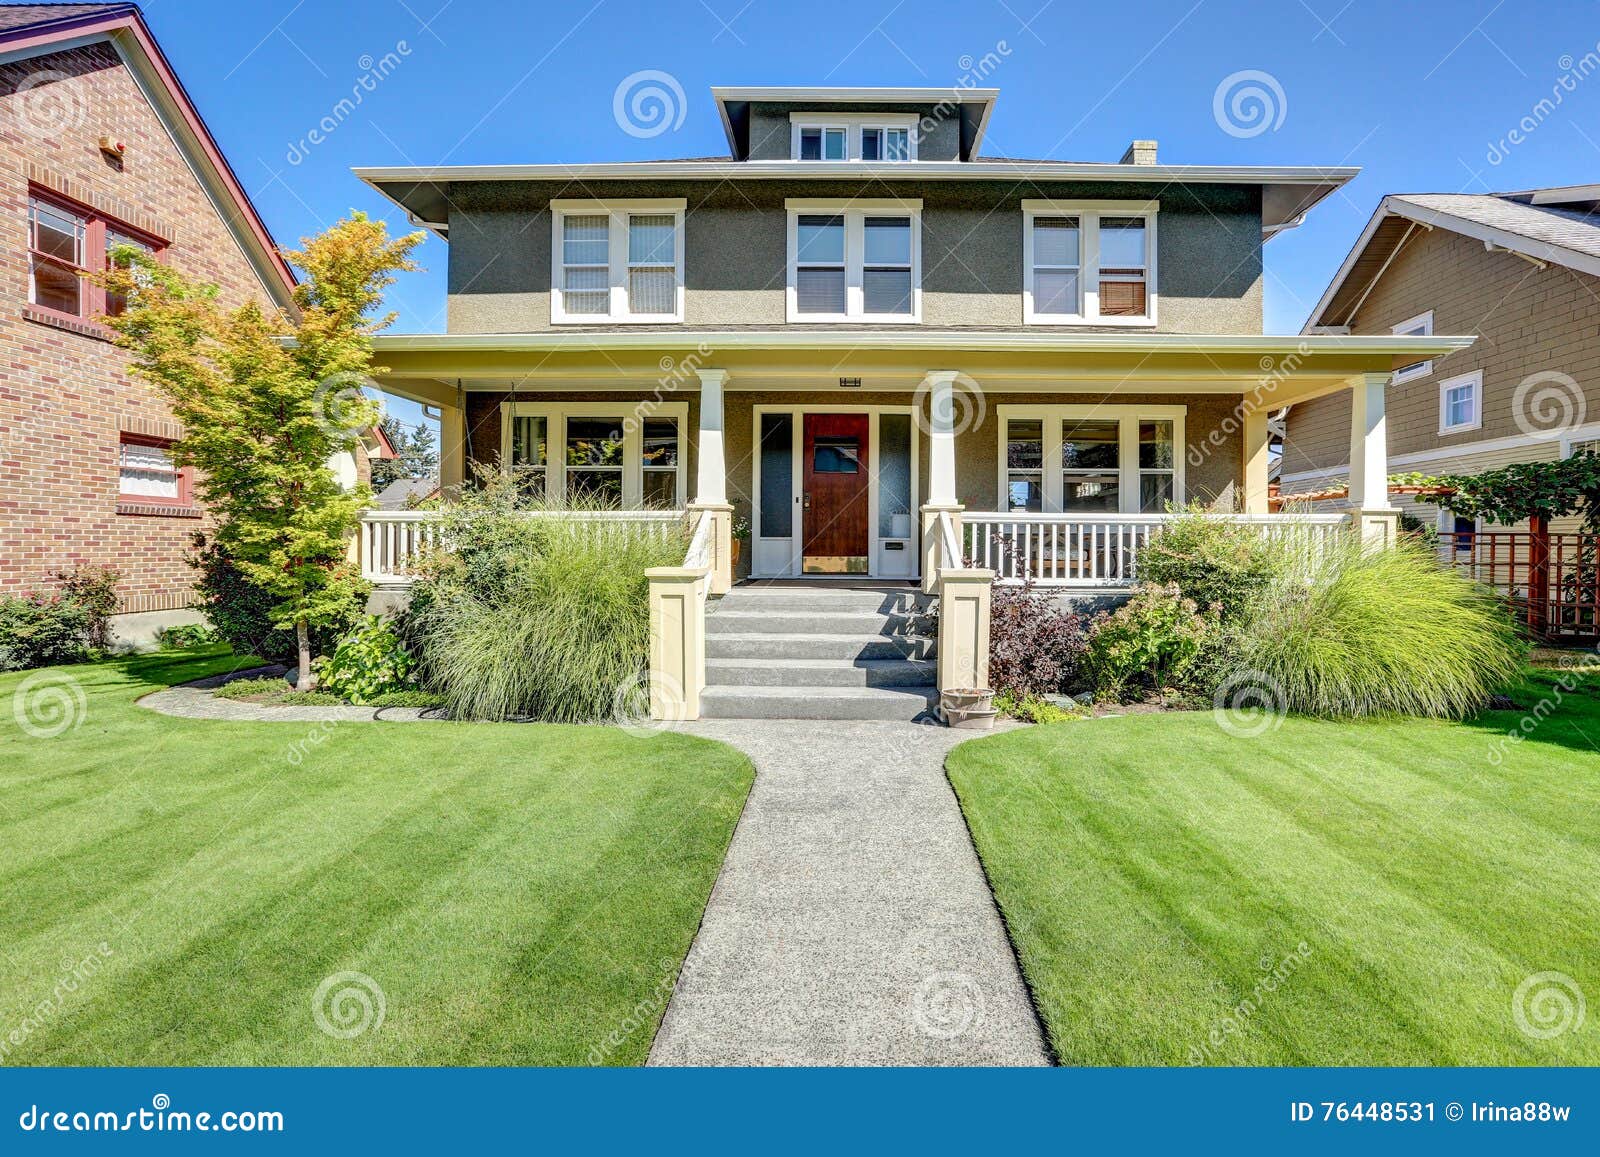 nice curb appeal of american craftsman style house.